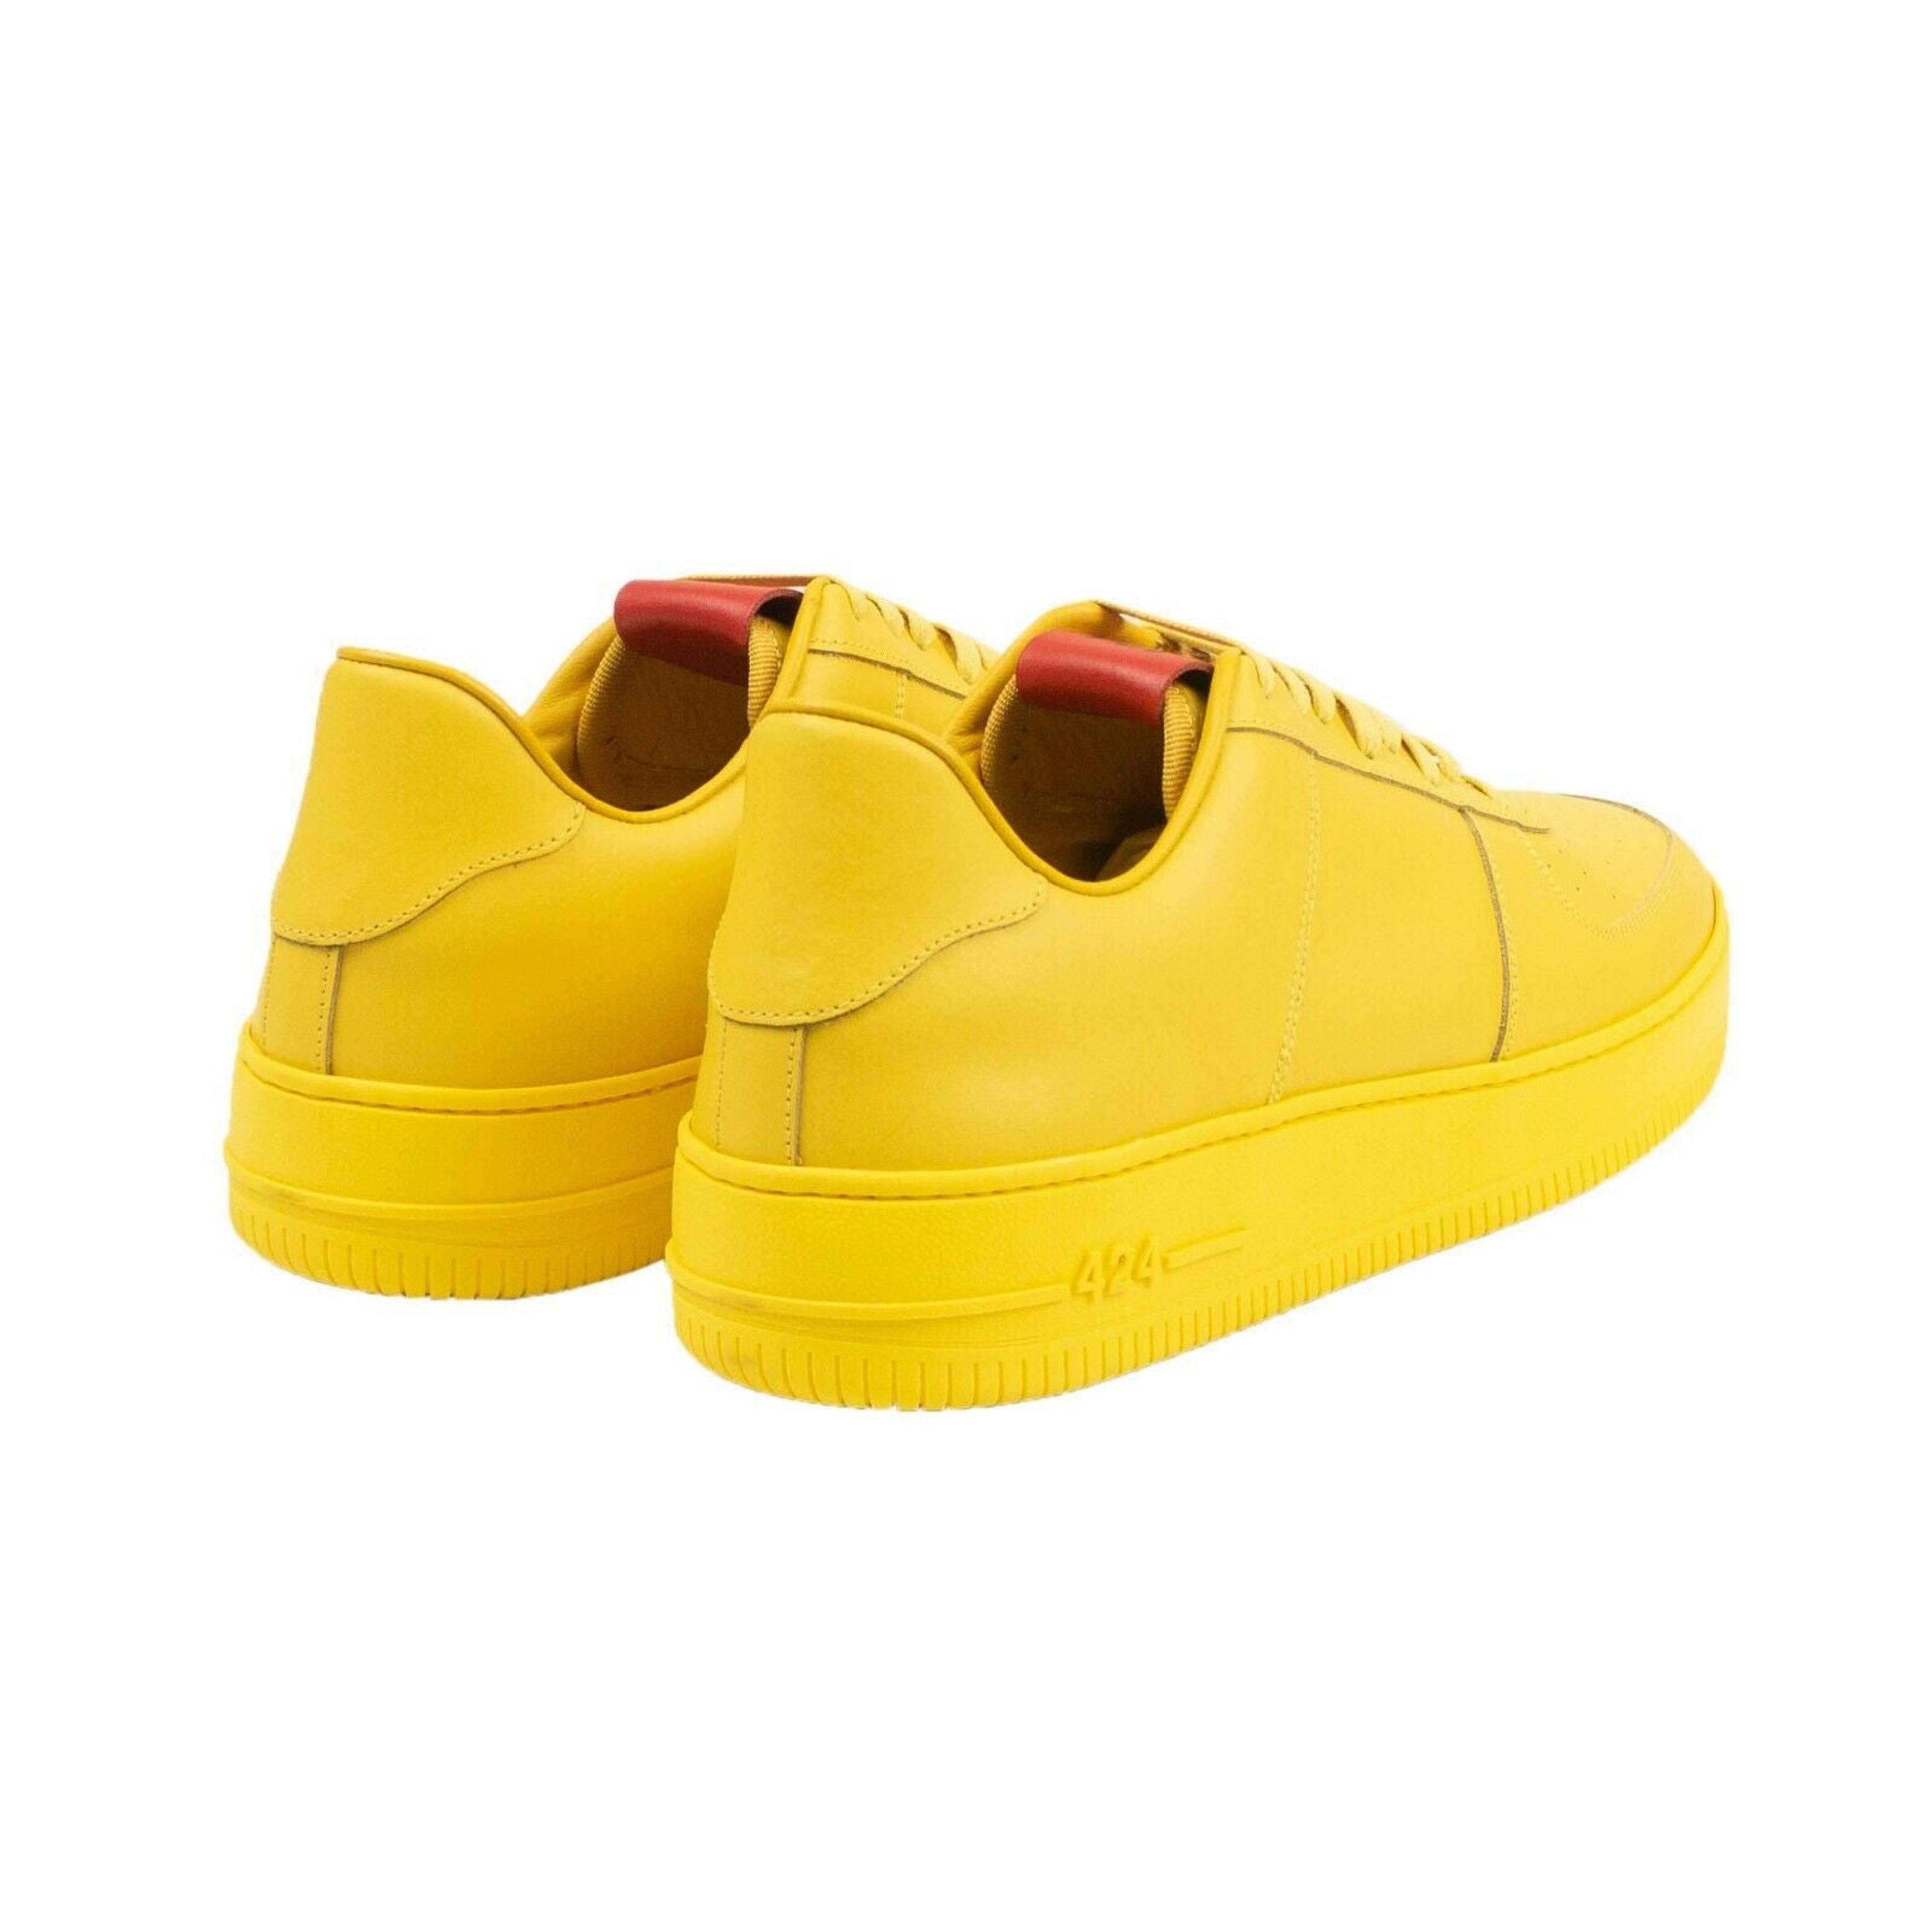 Alternate View 3 of Yellow Leather Low Top Sneakers